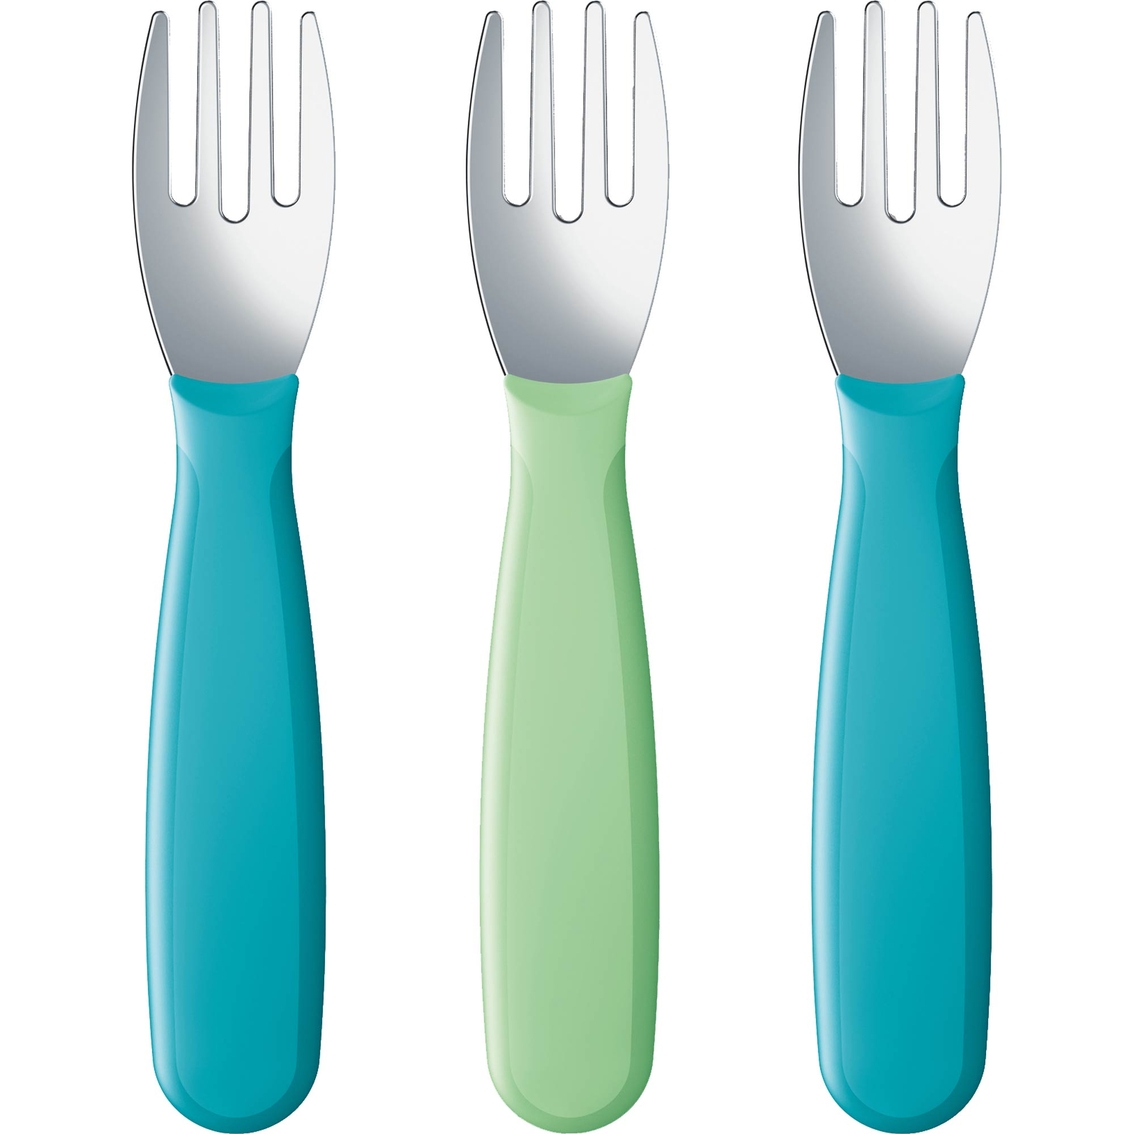 Graco NUK Kiddy Cutlery Fork 3 pc. Set - Image 2 of 2